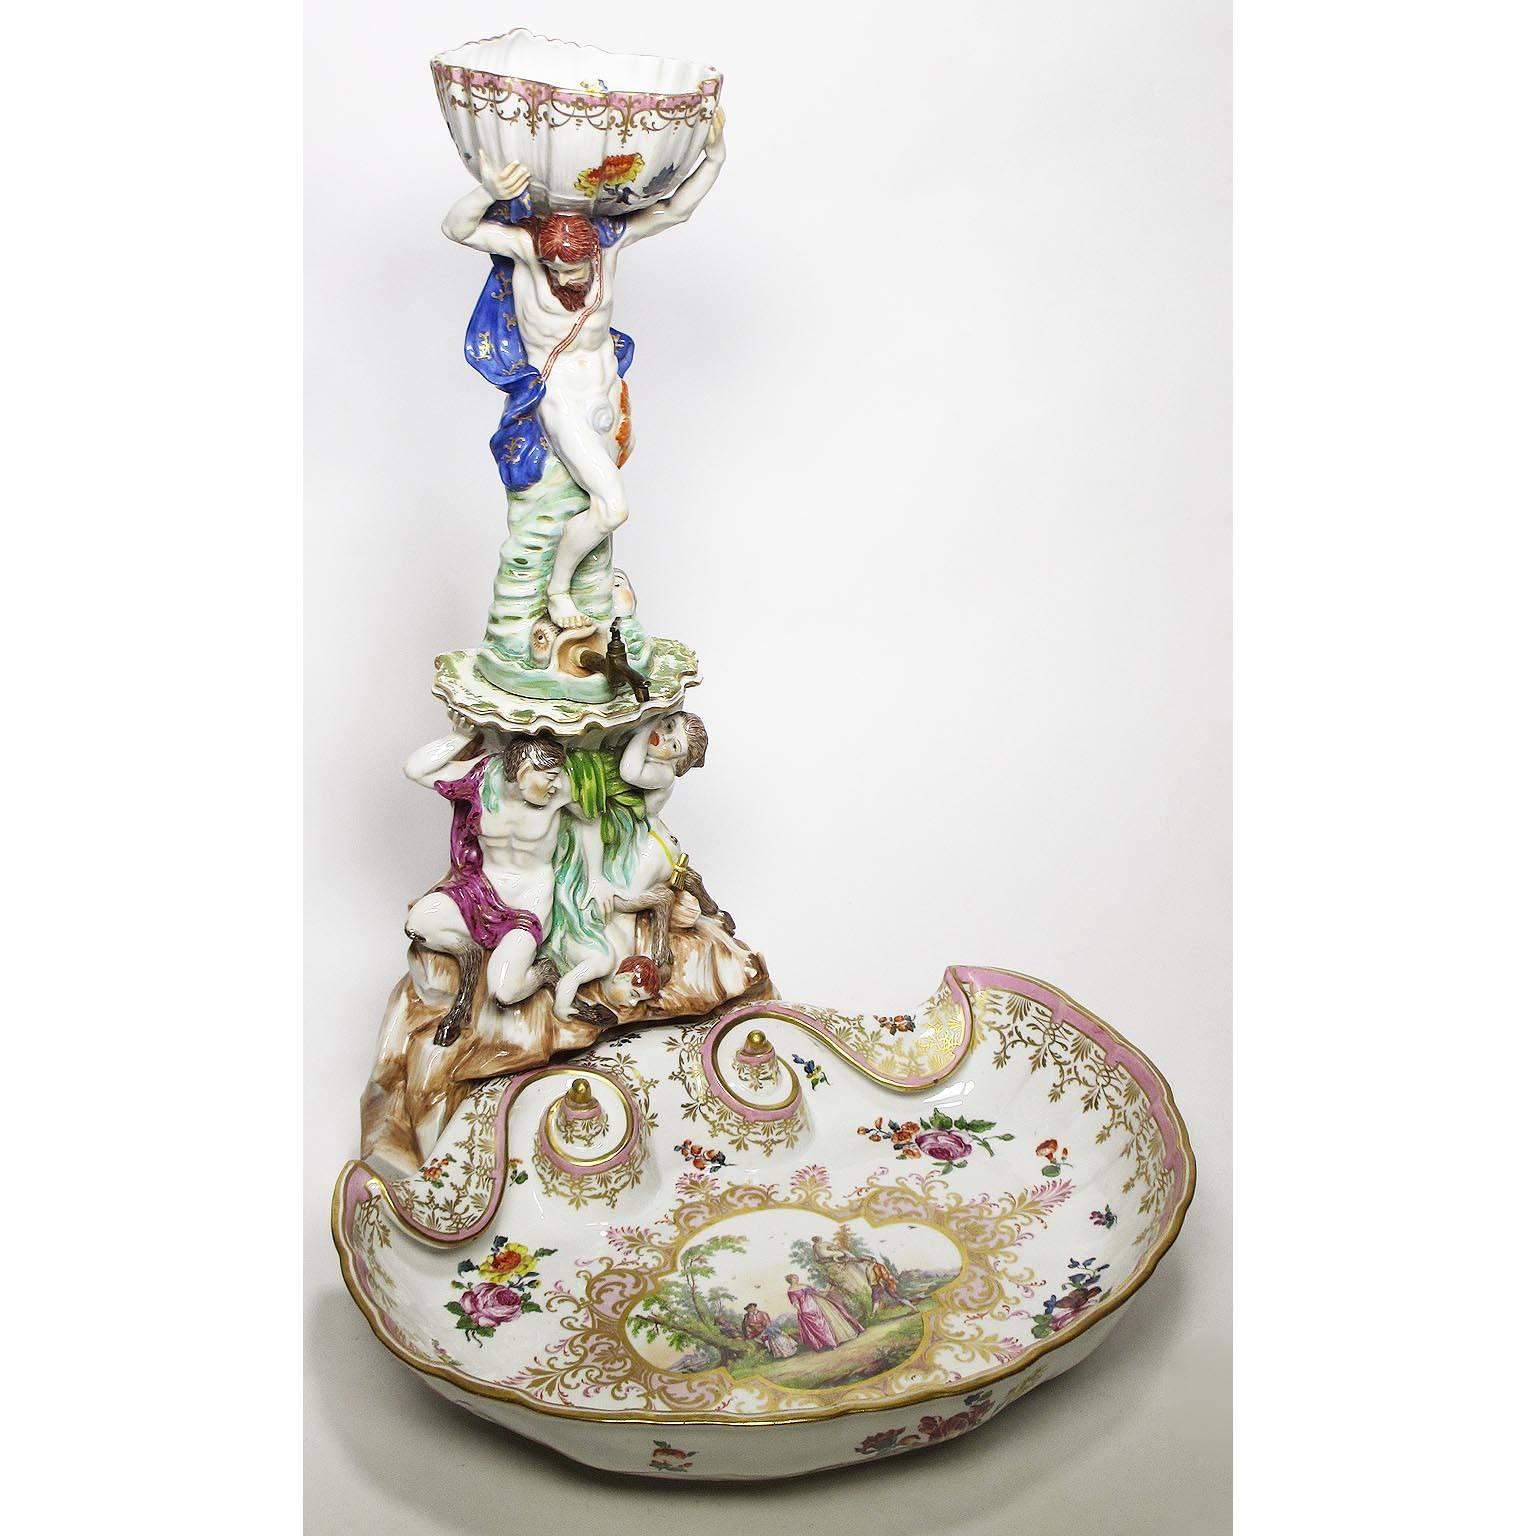 A very fine and rare German, 19th century figural porcelain liquor dispenser fountain. The two-part allegorical Baroque style fountain depicting a standing bearded man, his arms raised while holding a seashell-shaped basing decorated with flowers